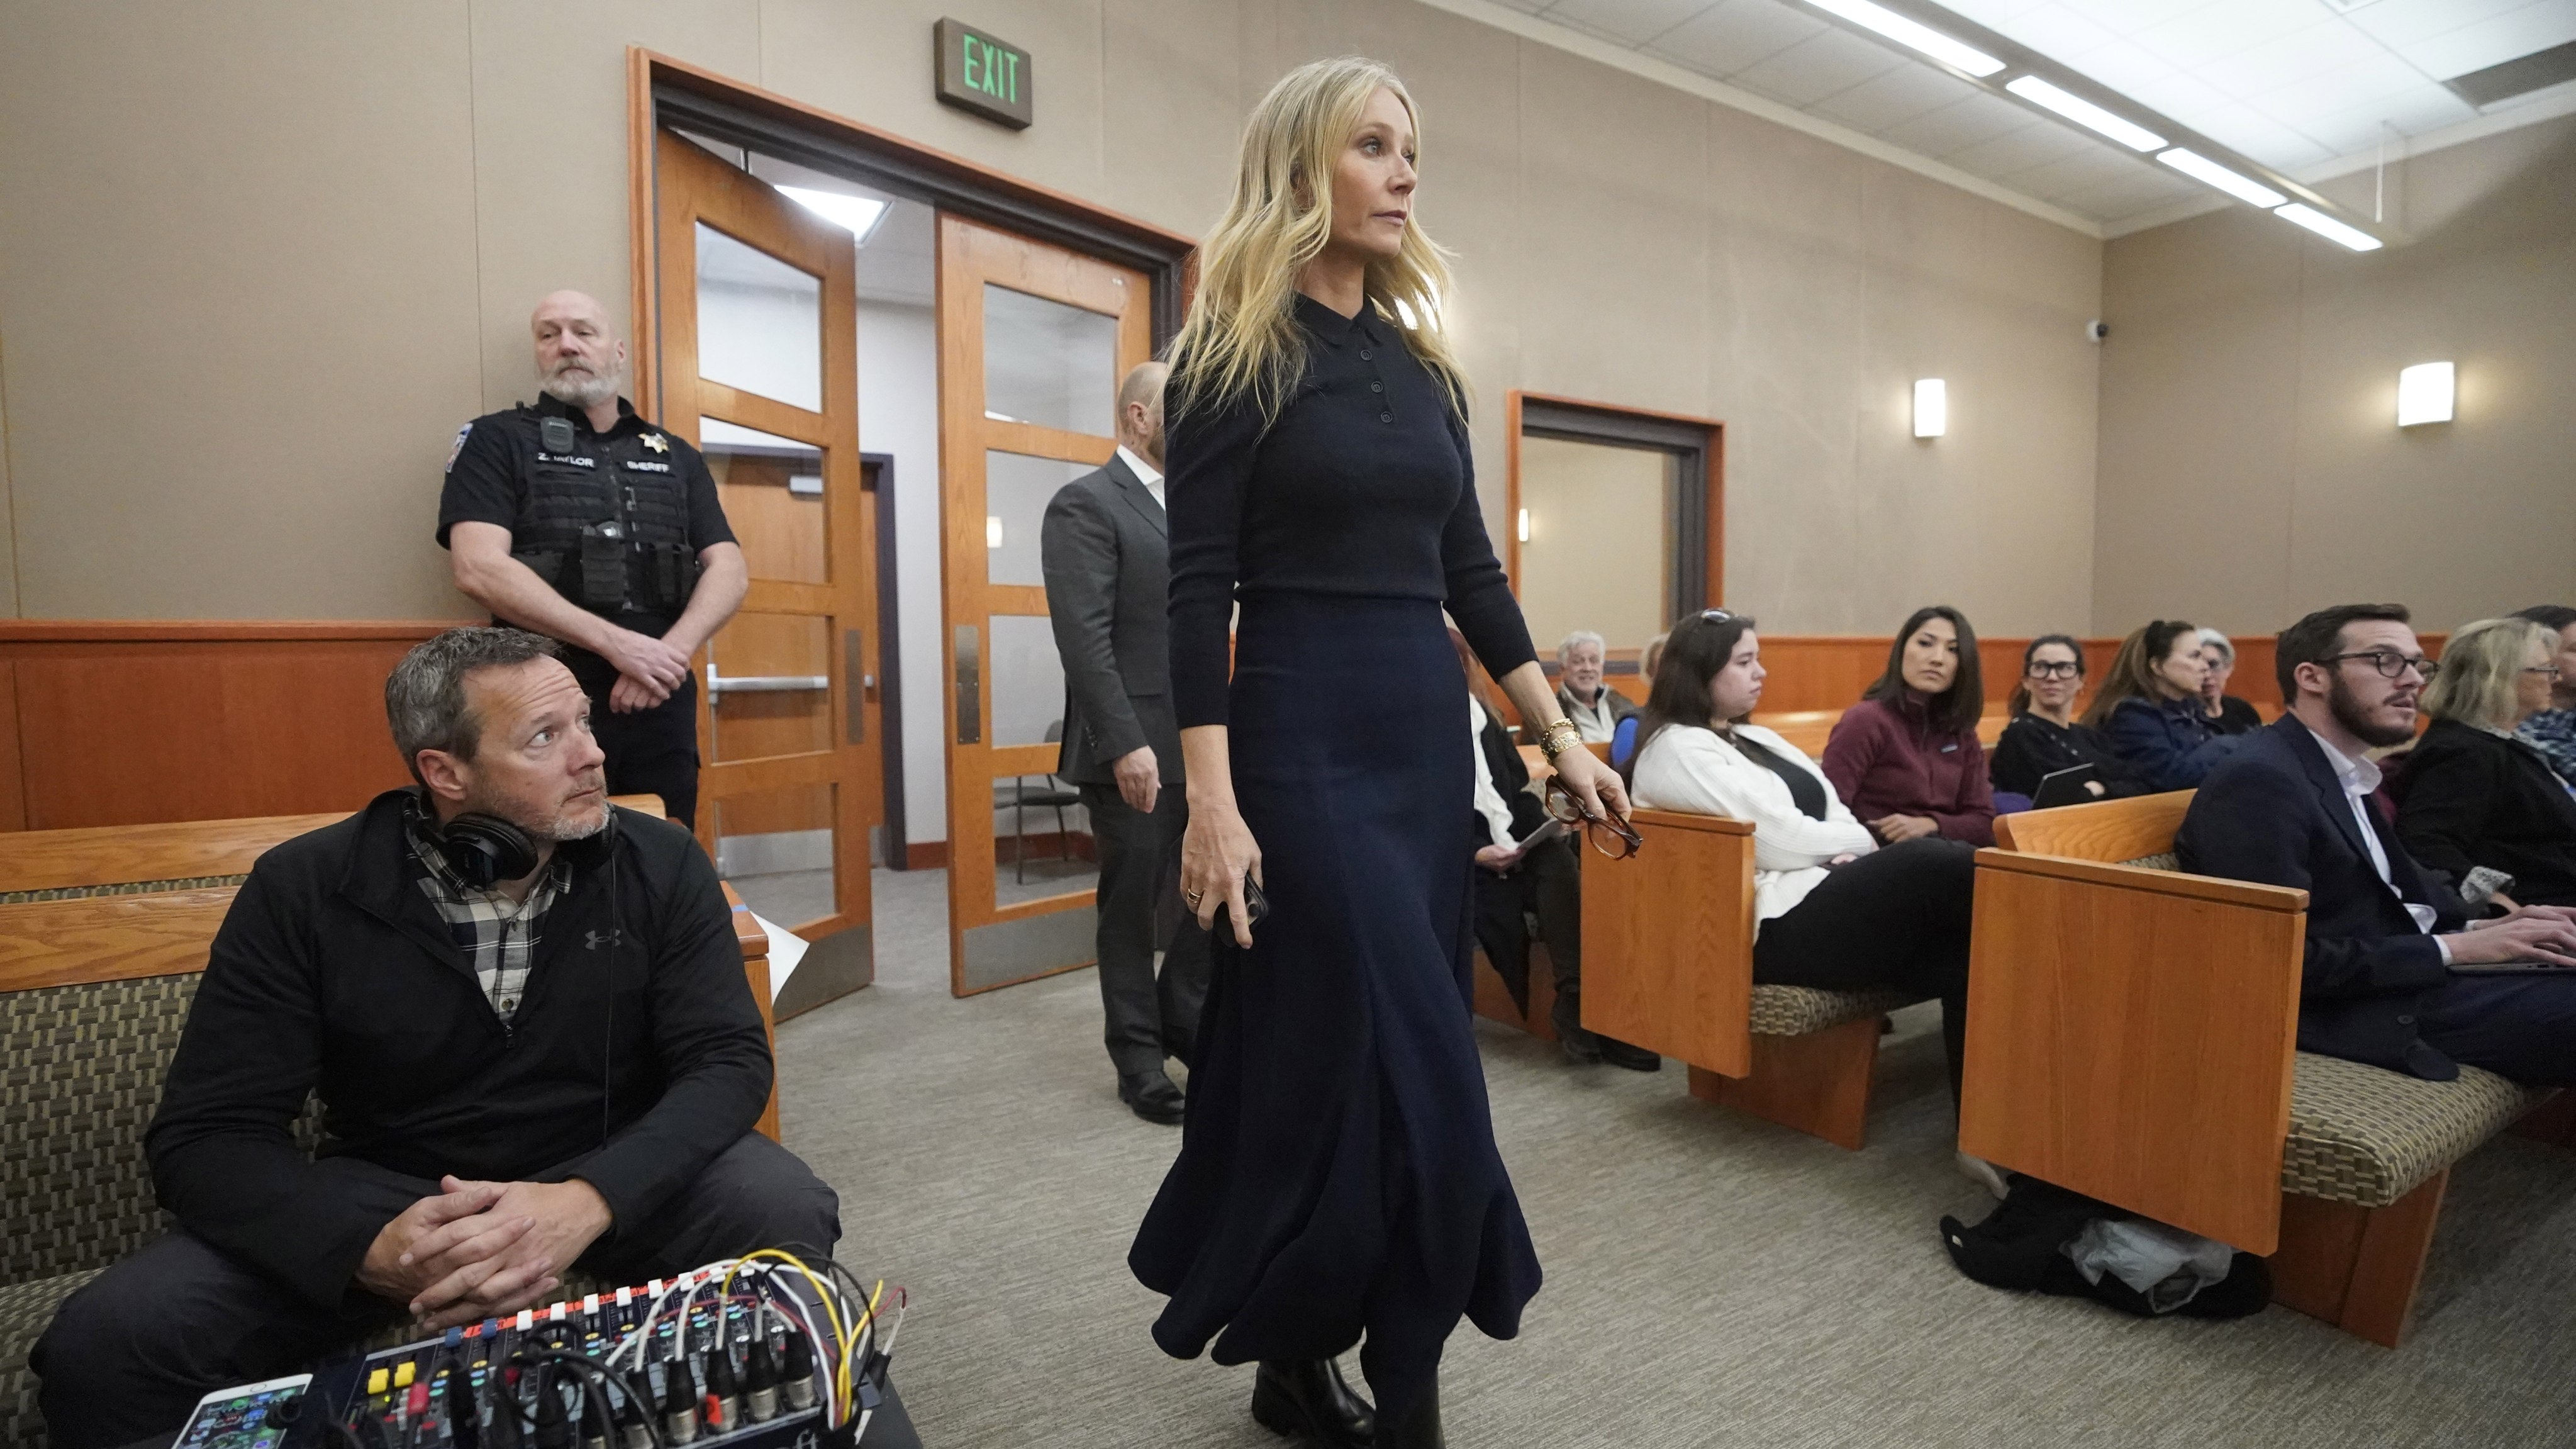 Actress Gwyneth Paltrow enters the courtroom in Park City, Utah, US on Friday. Photo: EPA-EFE